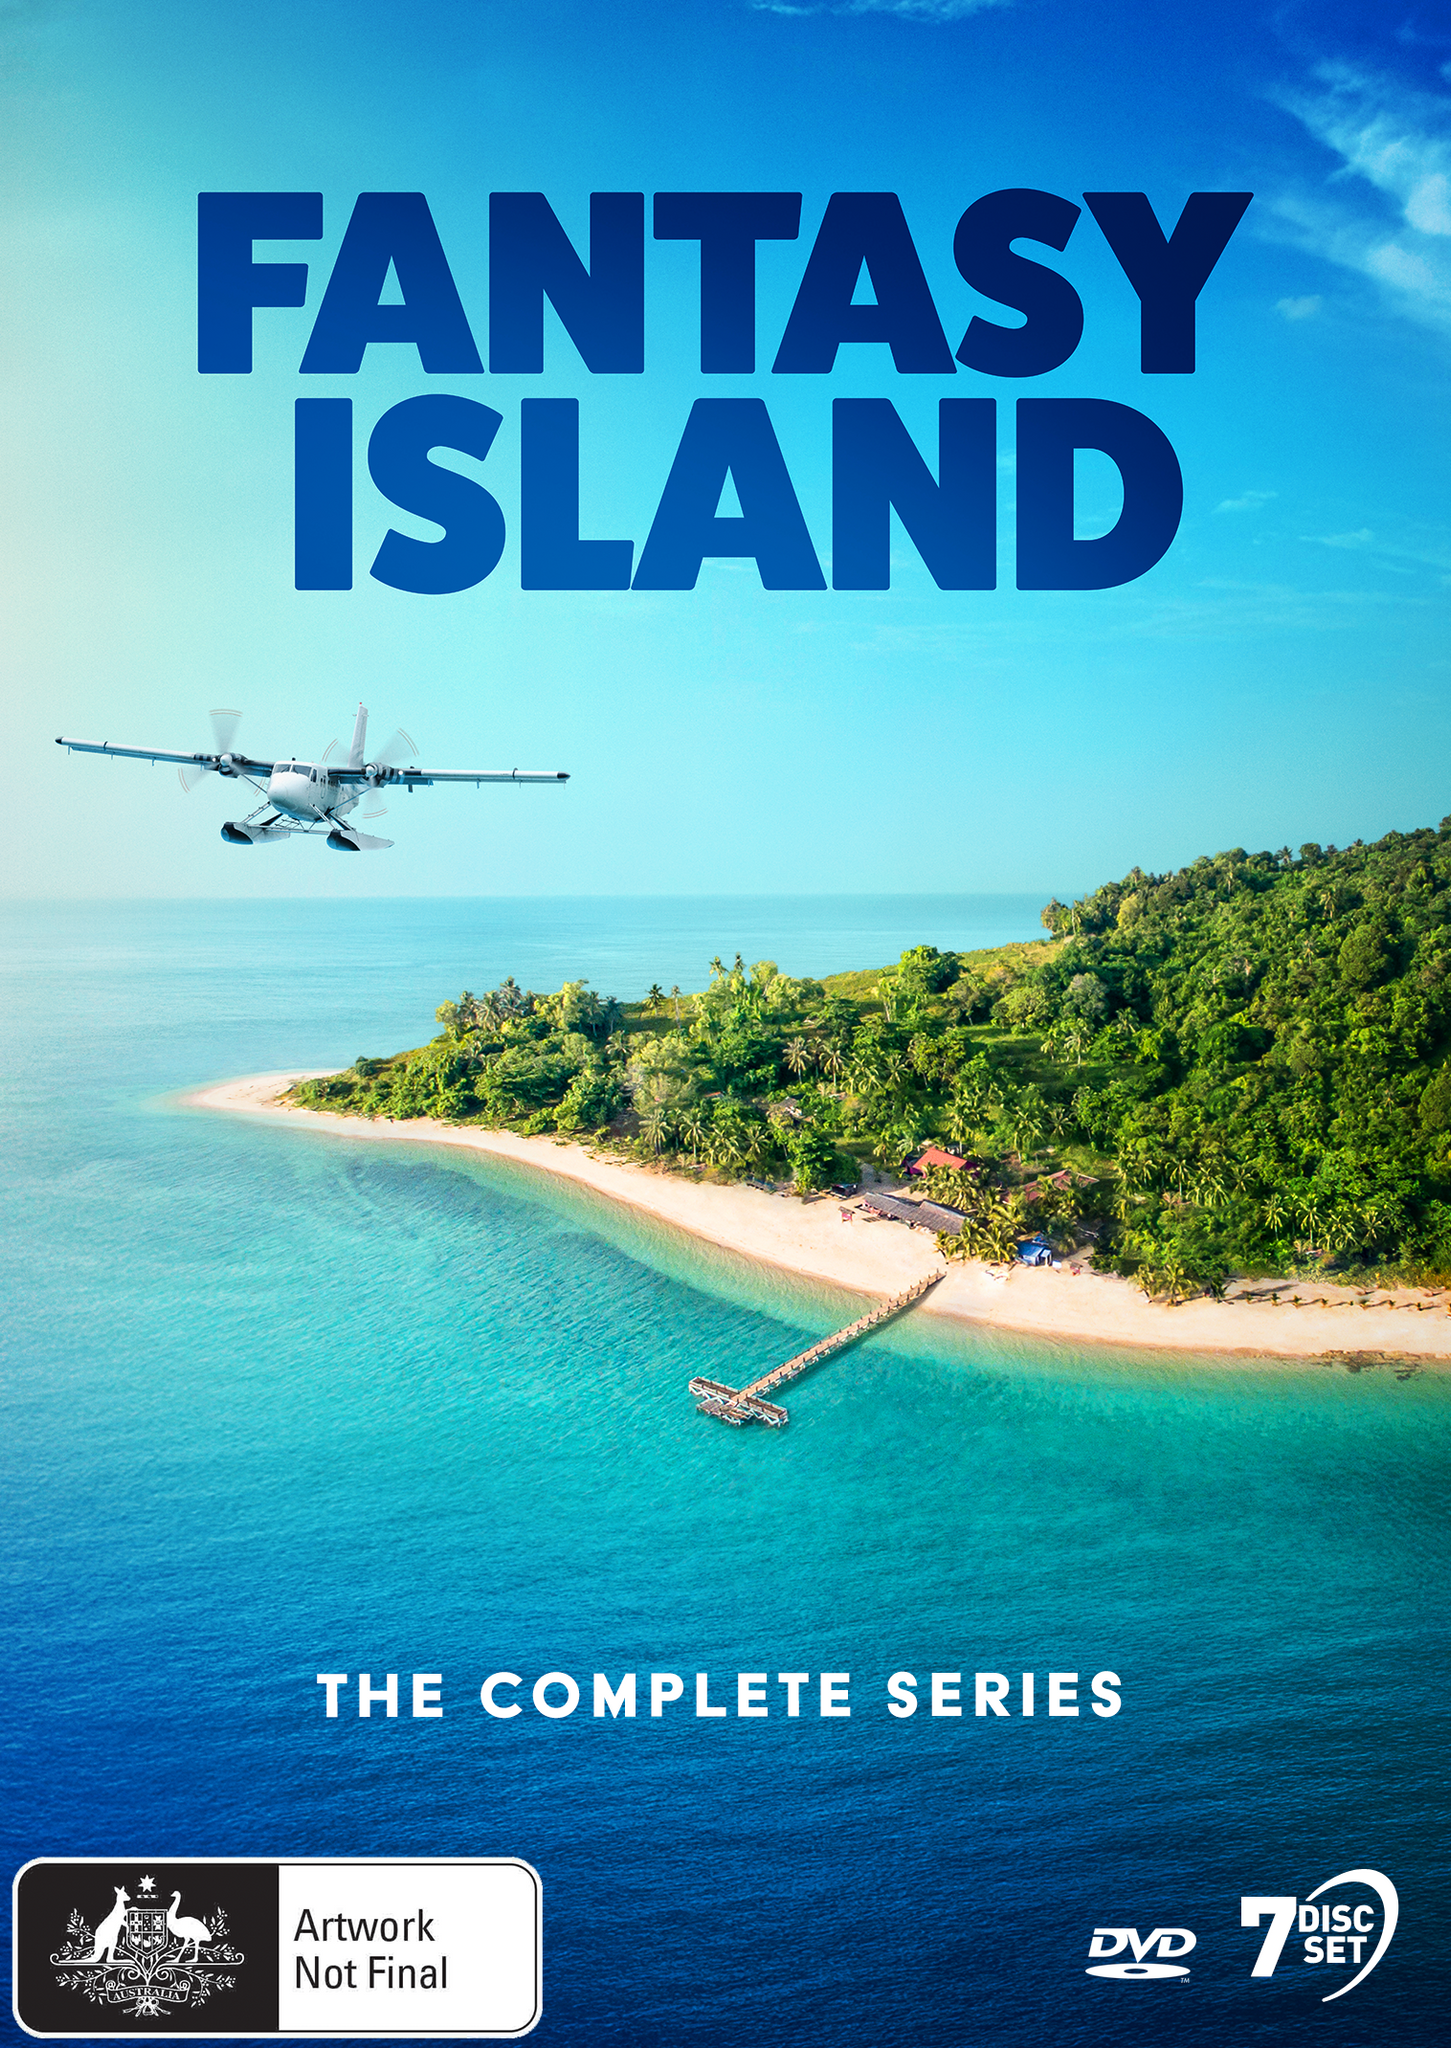 FANTASY ISLAND: THE COMPLETE SERIES